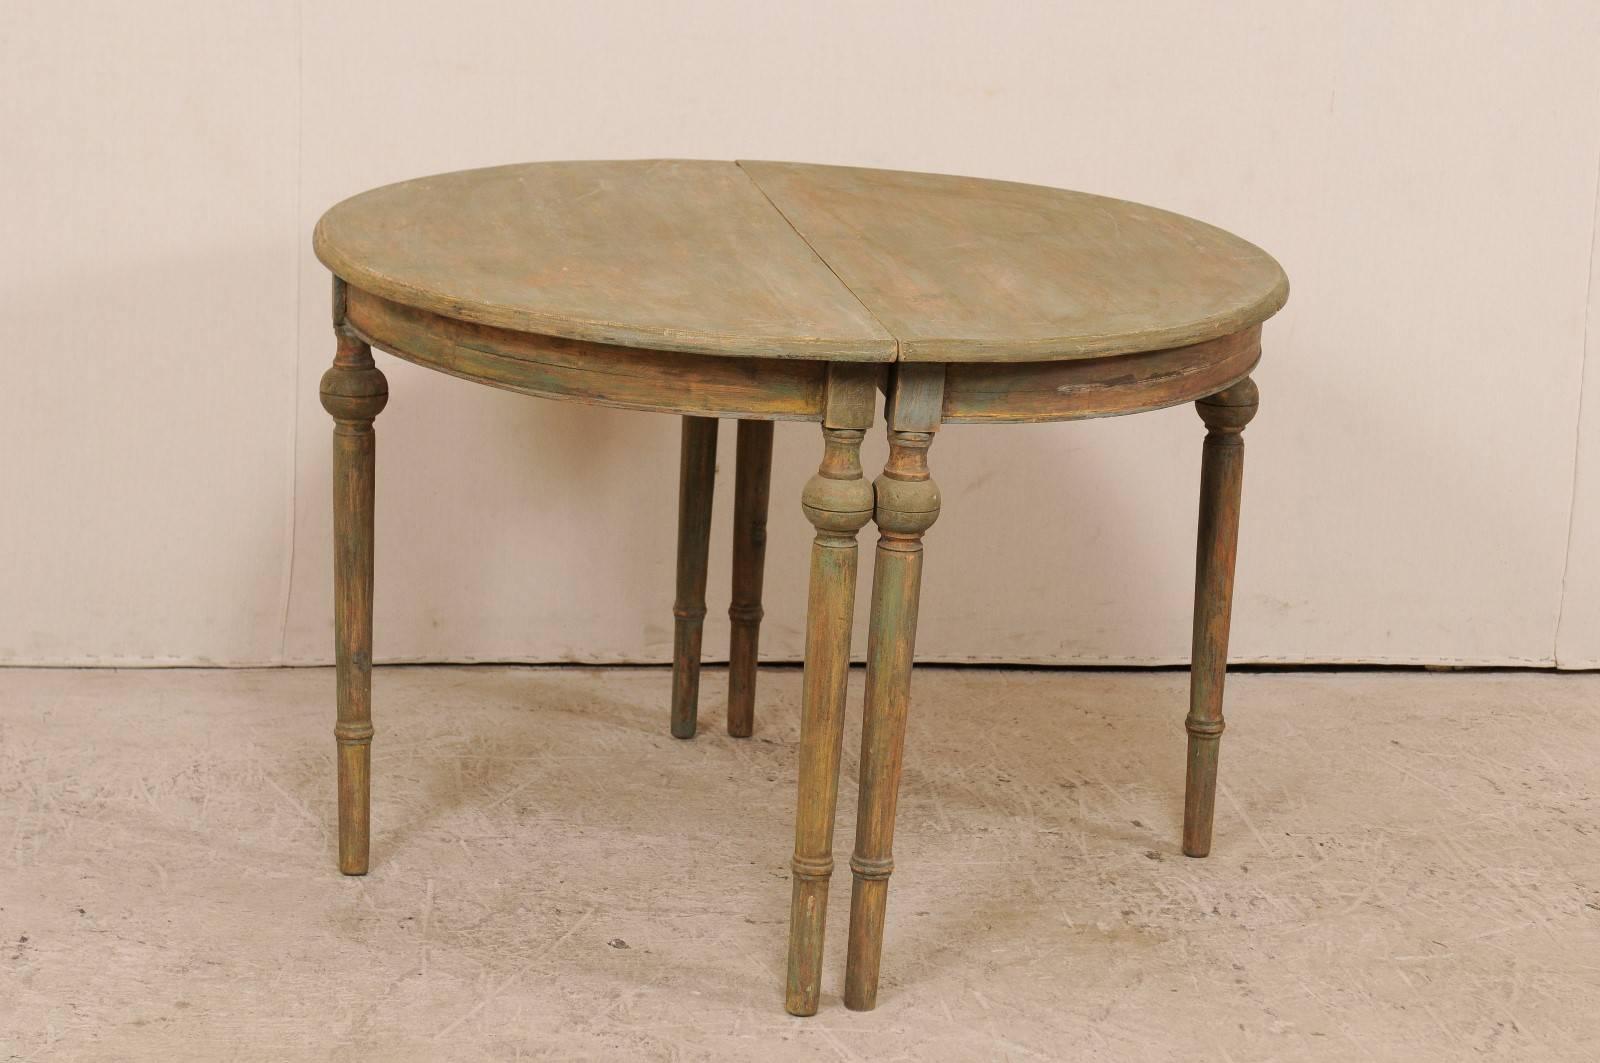 Pair of 19th Century Swedish Painted Wood Demilune Tables in Warm Sage Hues 3